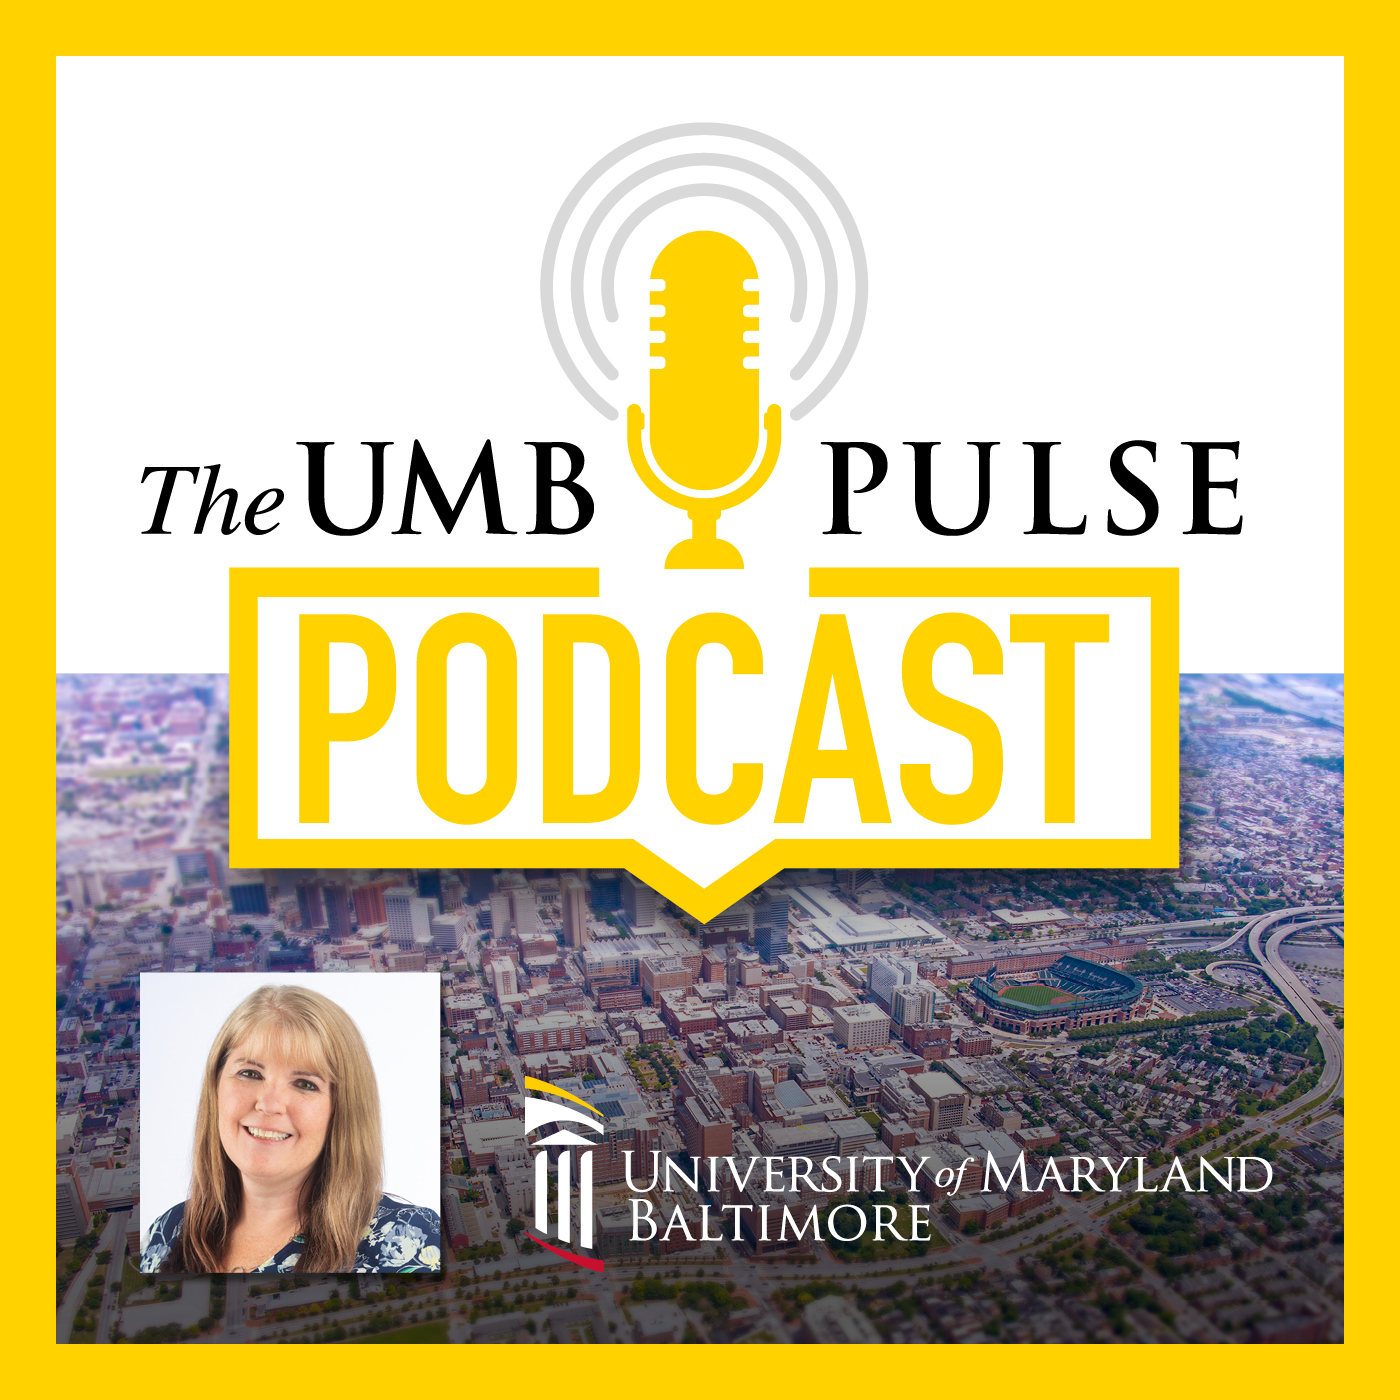 UMB Pulse podcast with photo of Angela Hall